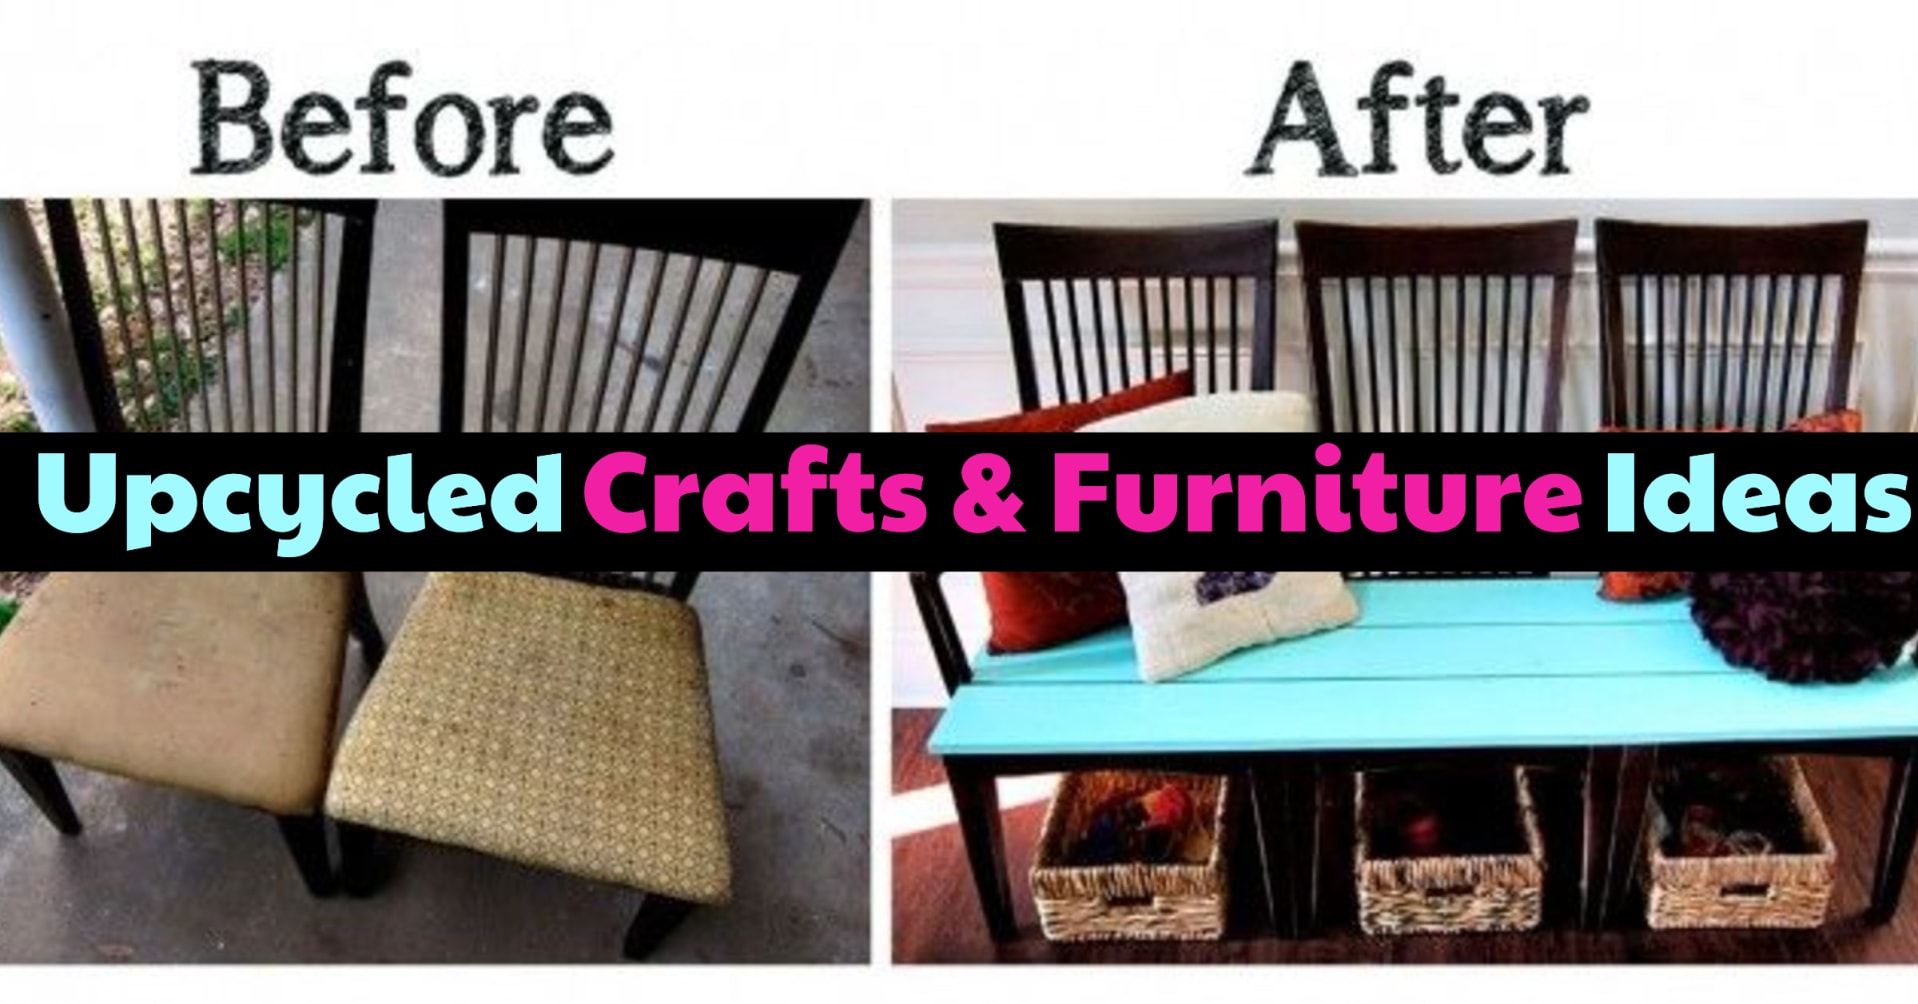 Easy DIY upcycled crafts and furniture ideas